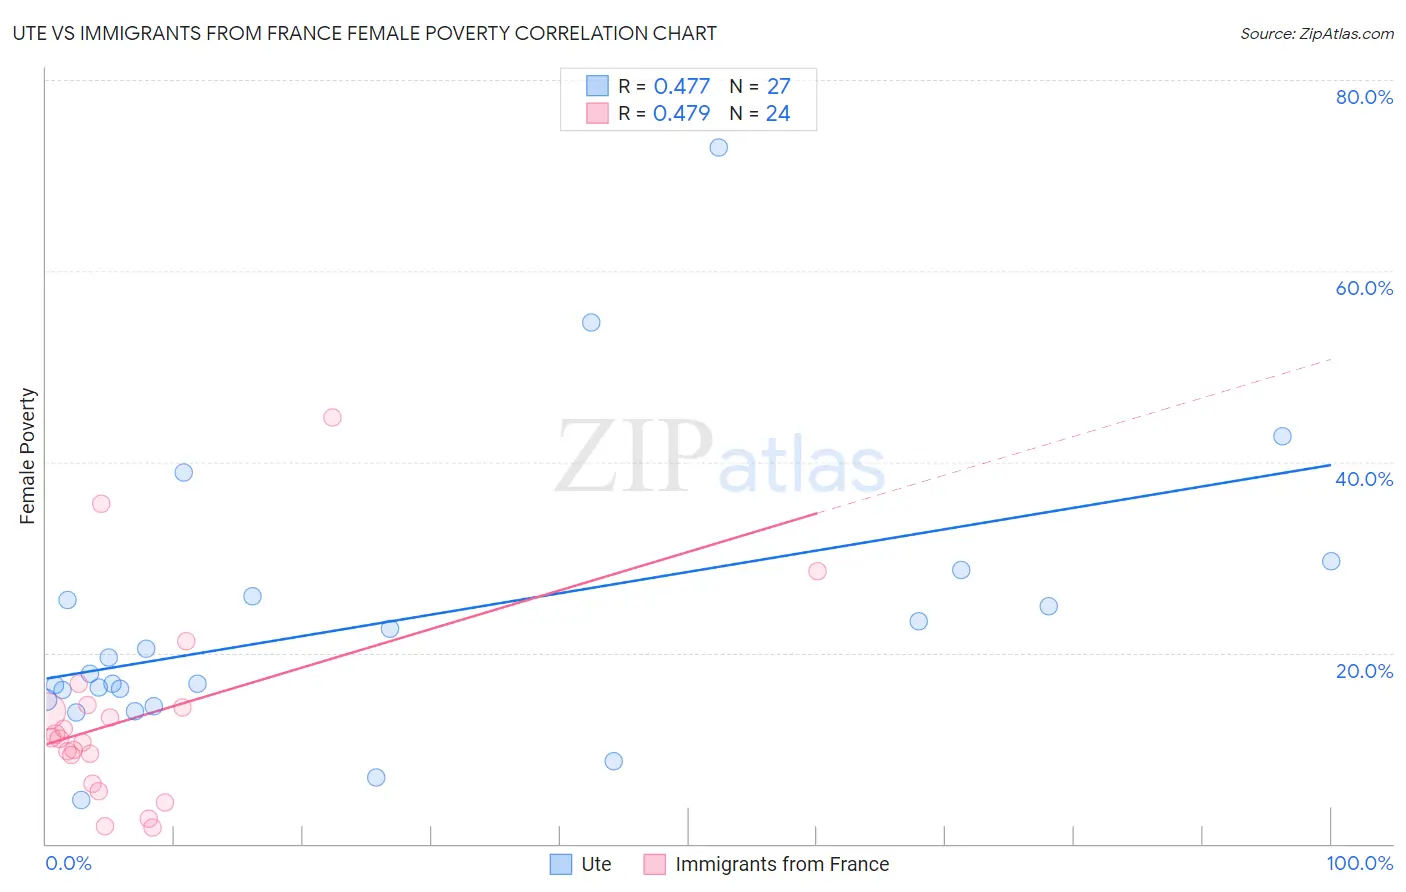 Ute vs Immigrants from France Female Poverty